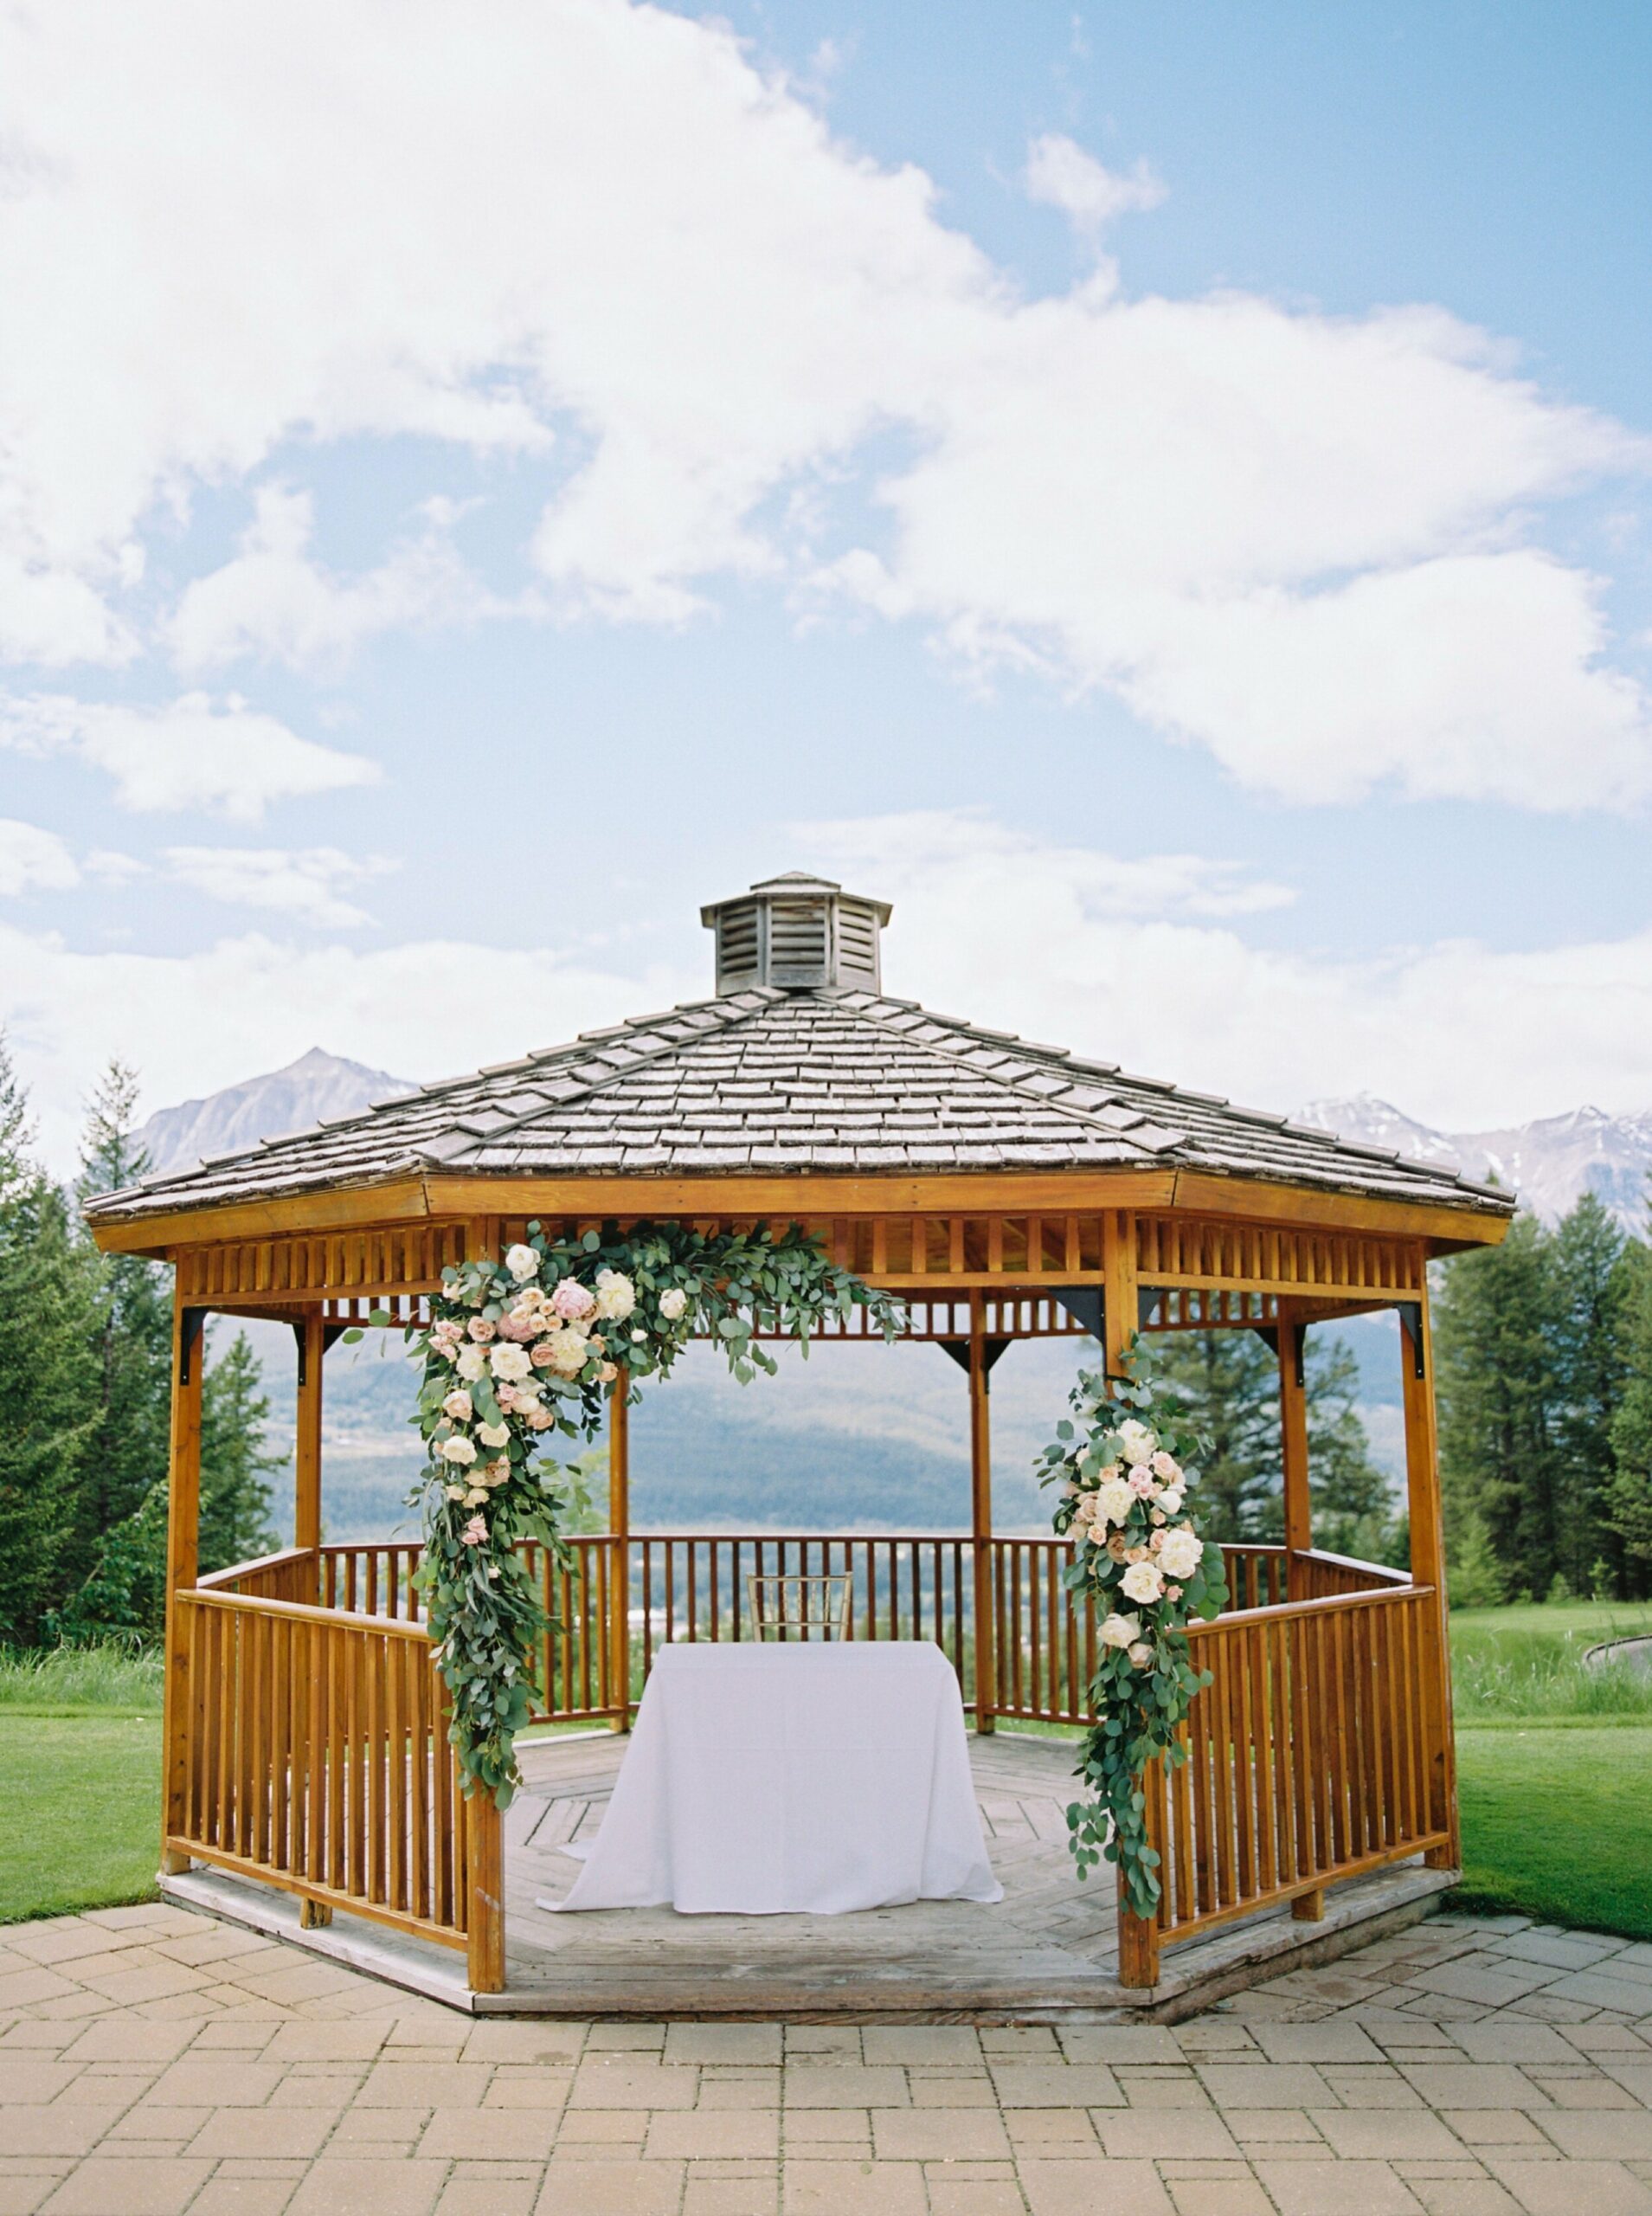 silvertip canmore wedding photographers